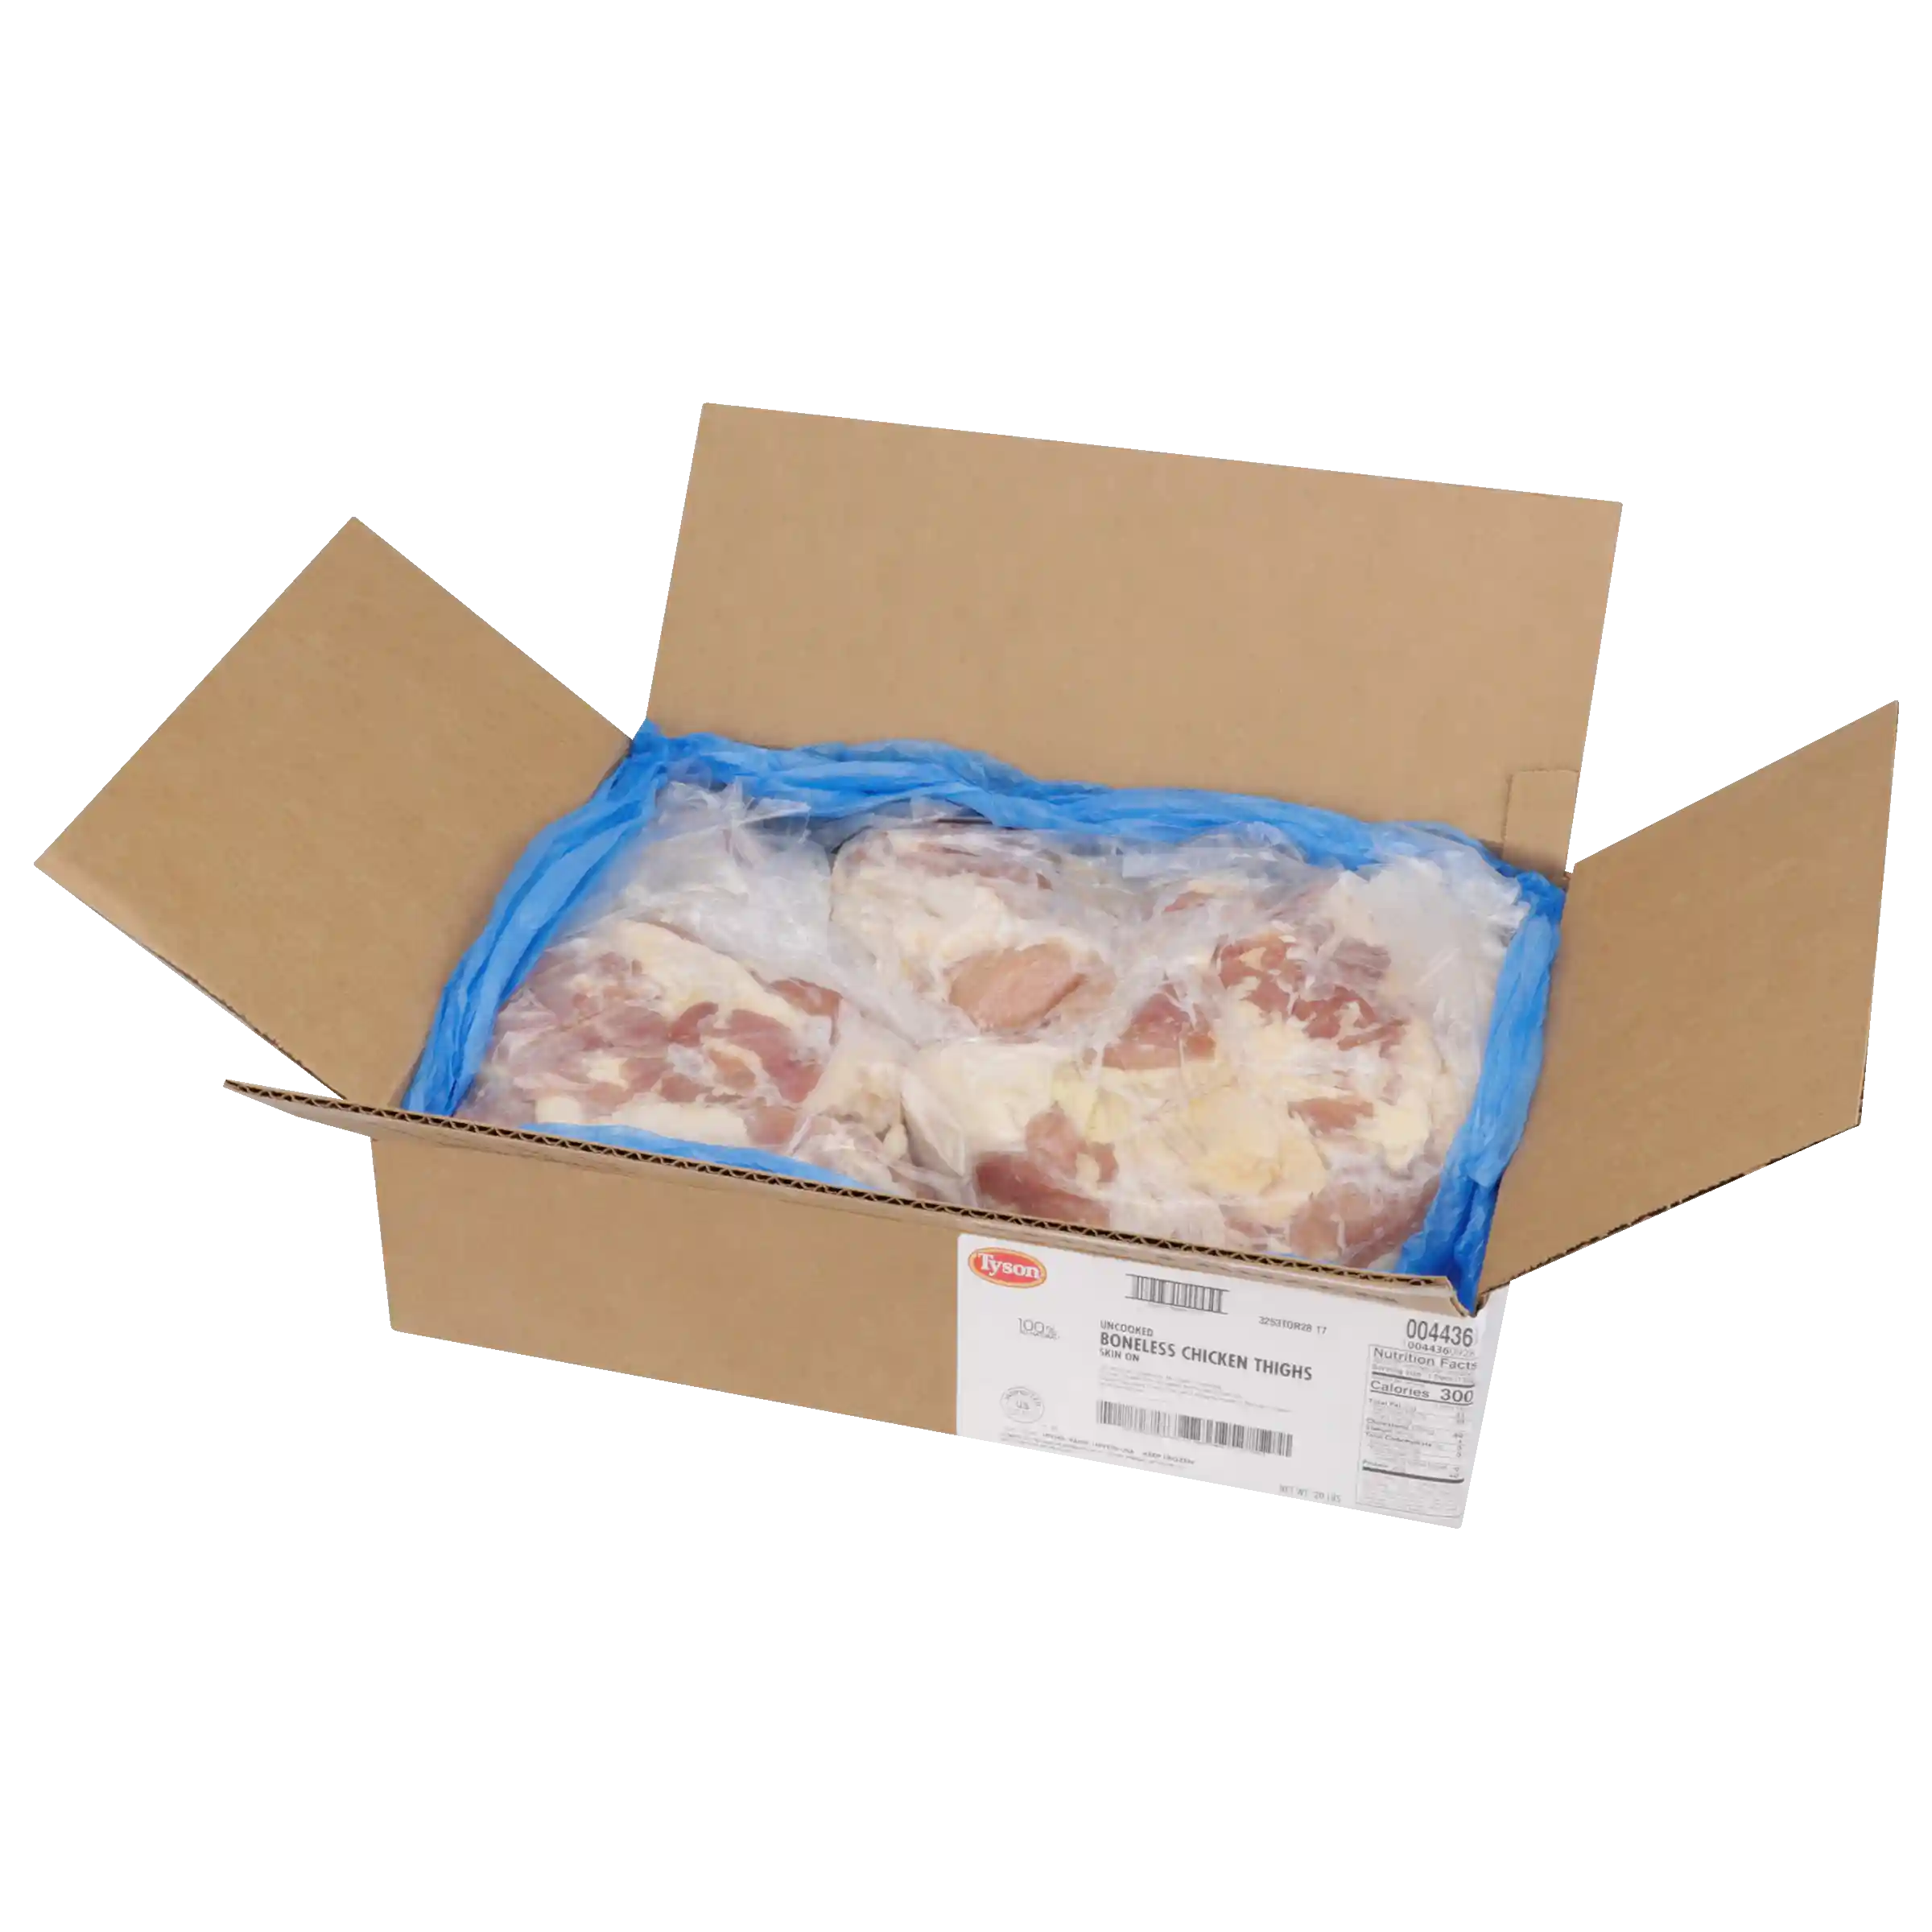 Tyson® All Natural* Uncooked Unbreaded Boneless Chicken Thighs, Skin On, 4.75 oz._image_31